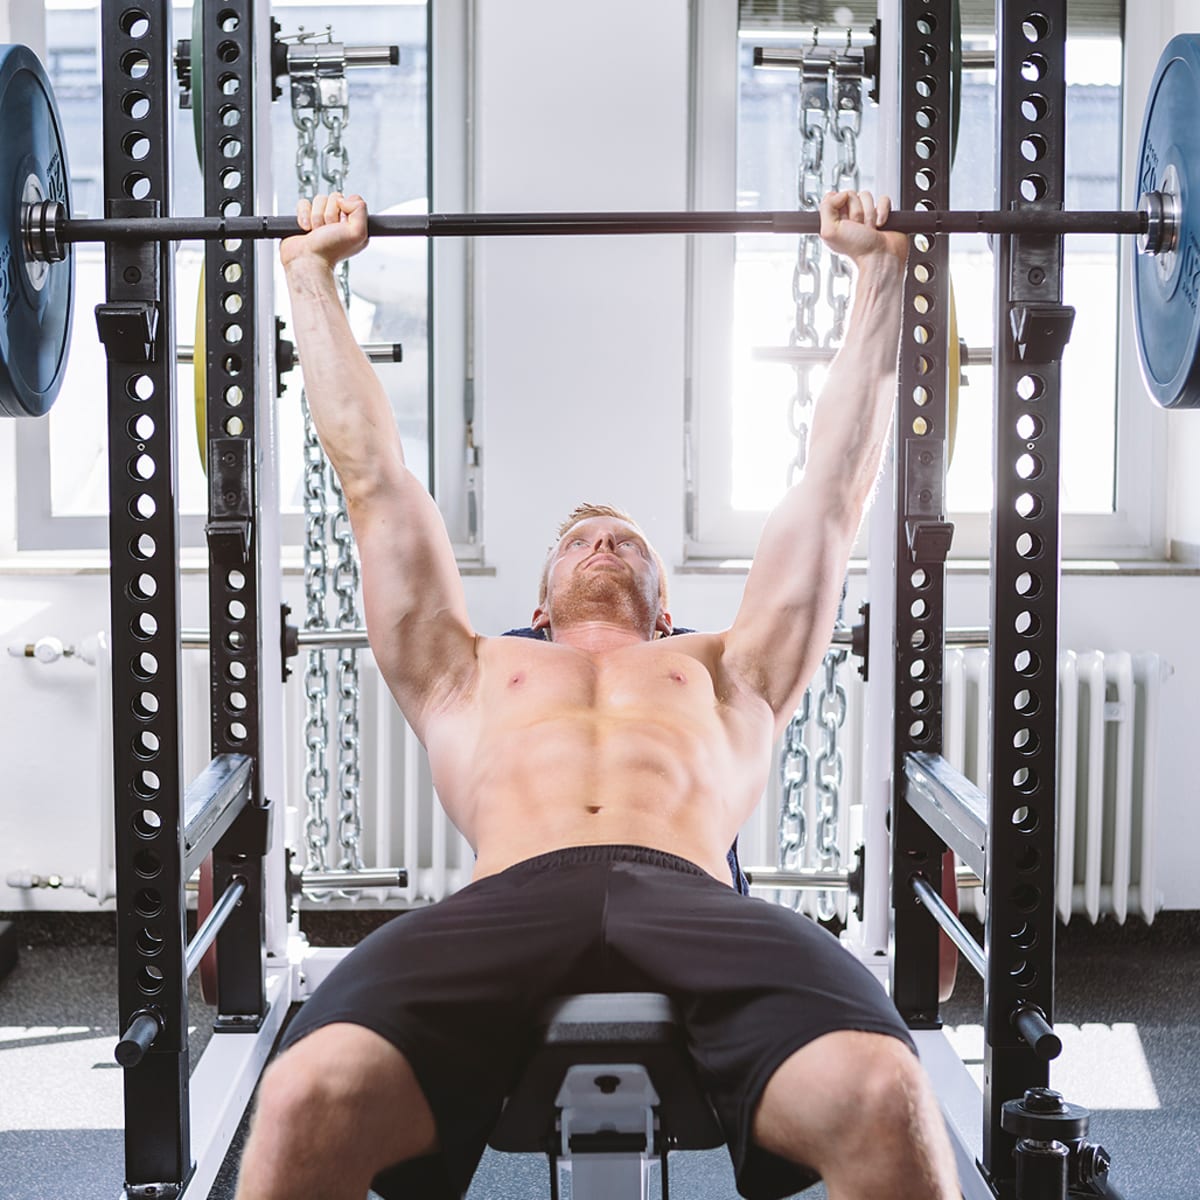 The Bench-Press Angle that Will Pump Up Your Pecs - Men's Journal